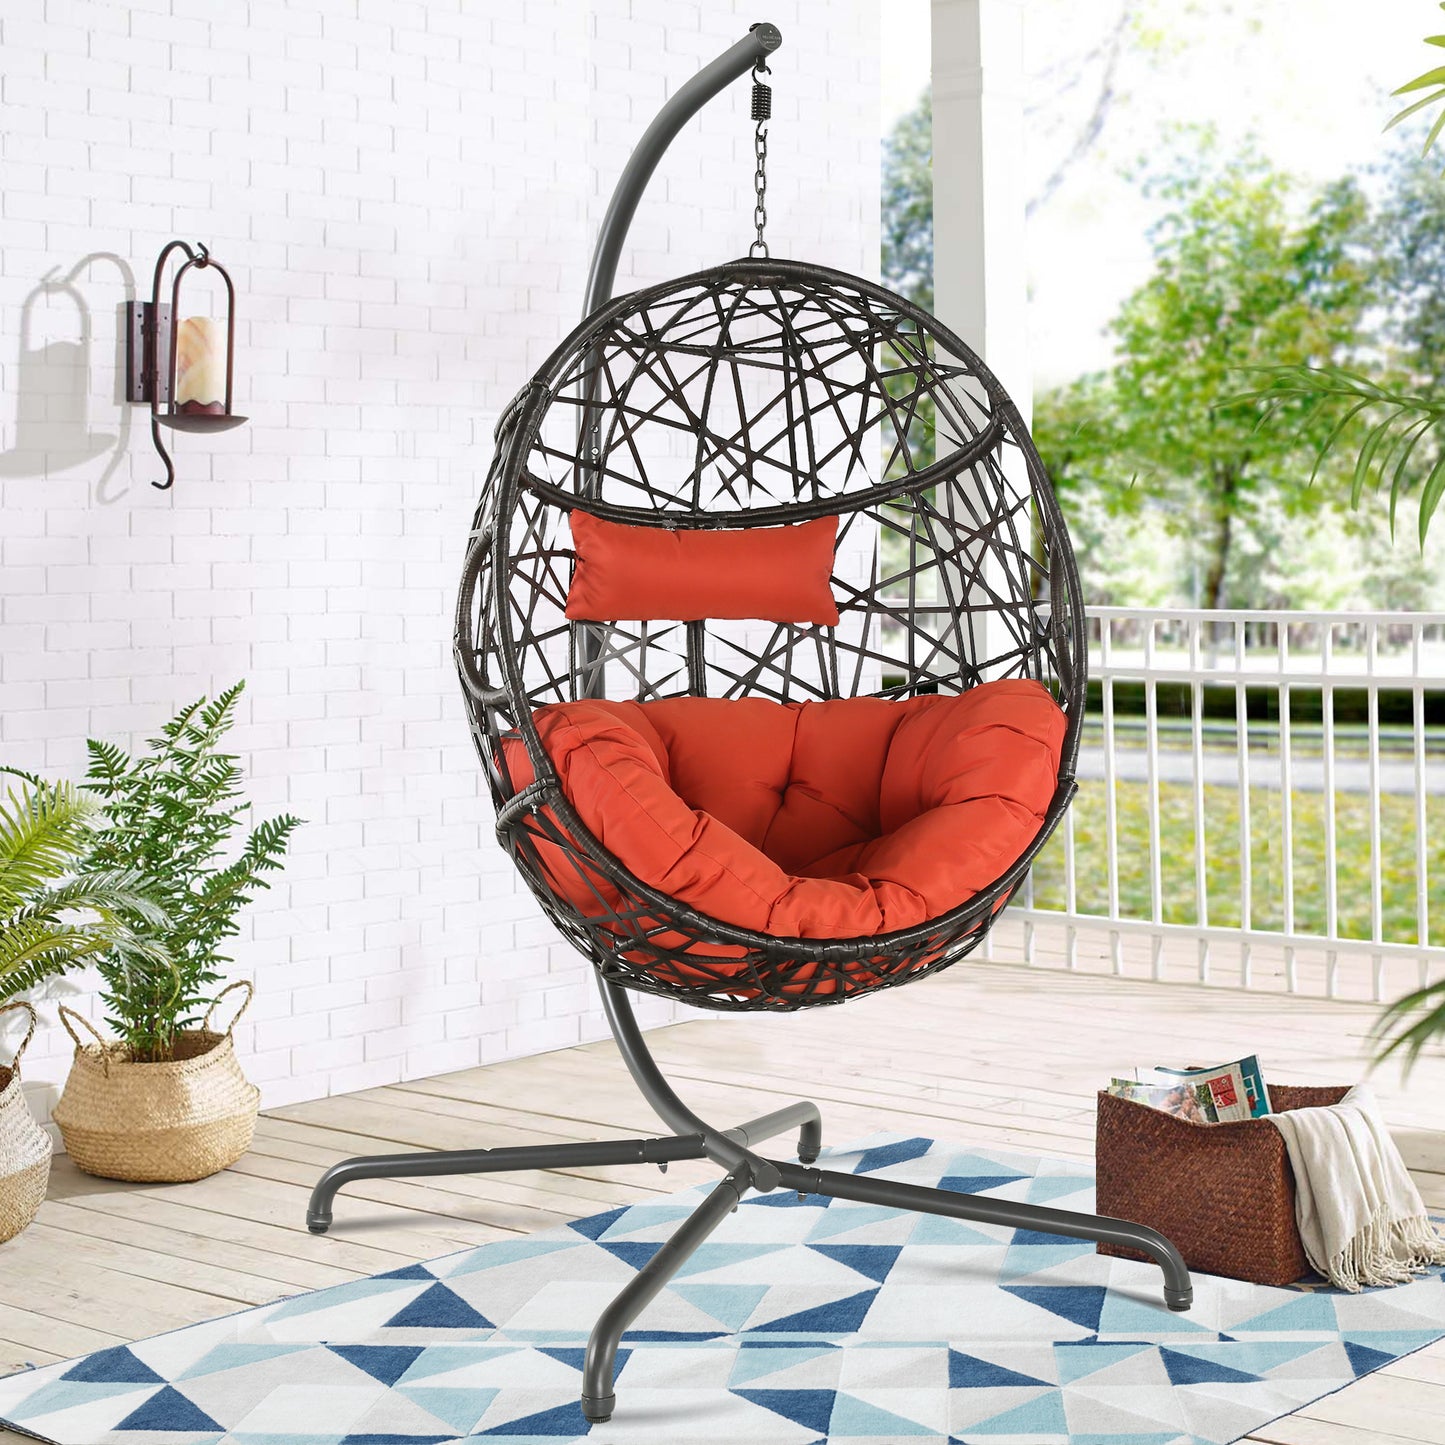 Hanging Egg Chair Outdoor Indoor Patio Swing Chair with UV Resistant Cushion Wicker Rattan Hammock Basket Chair with Stand